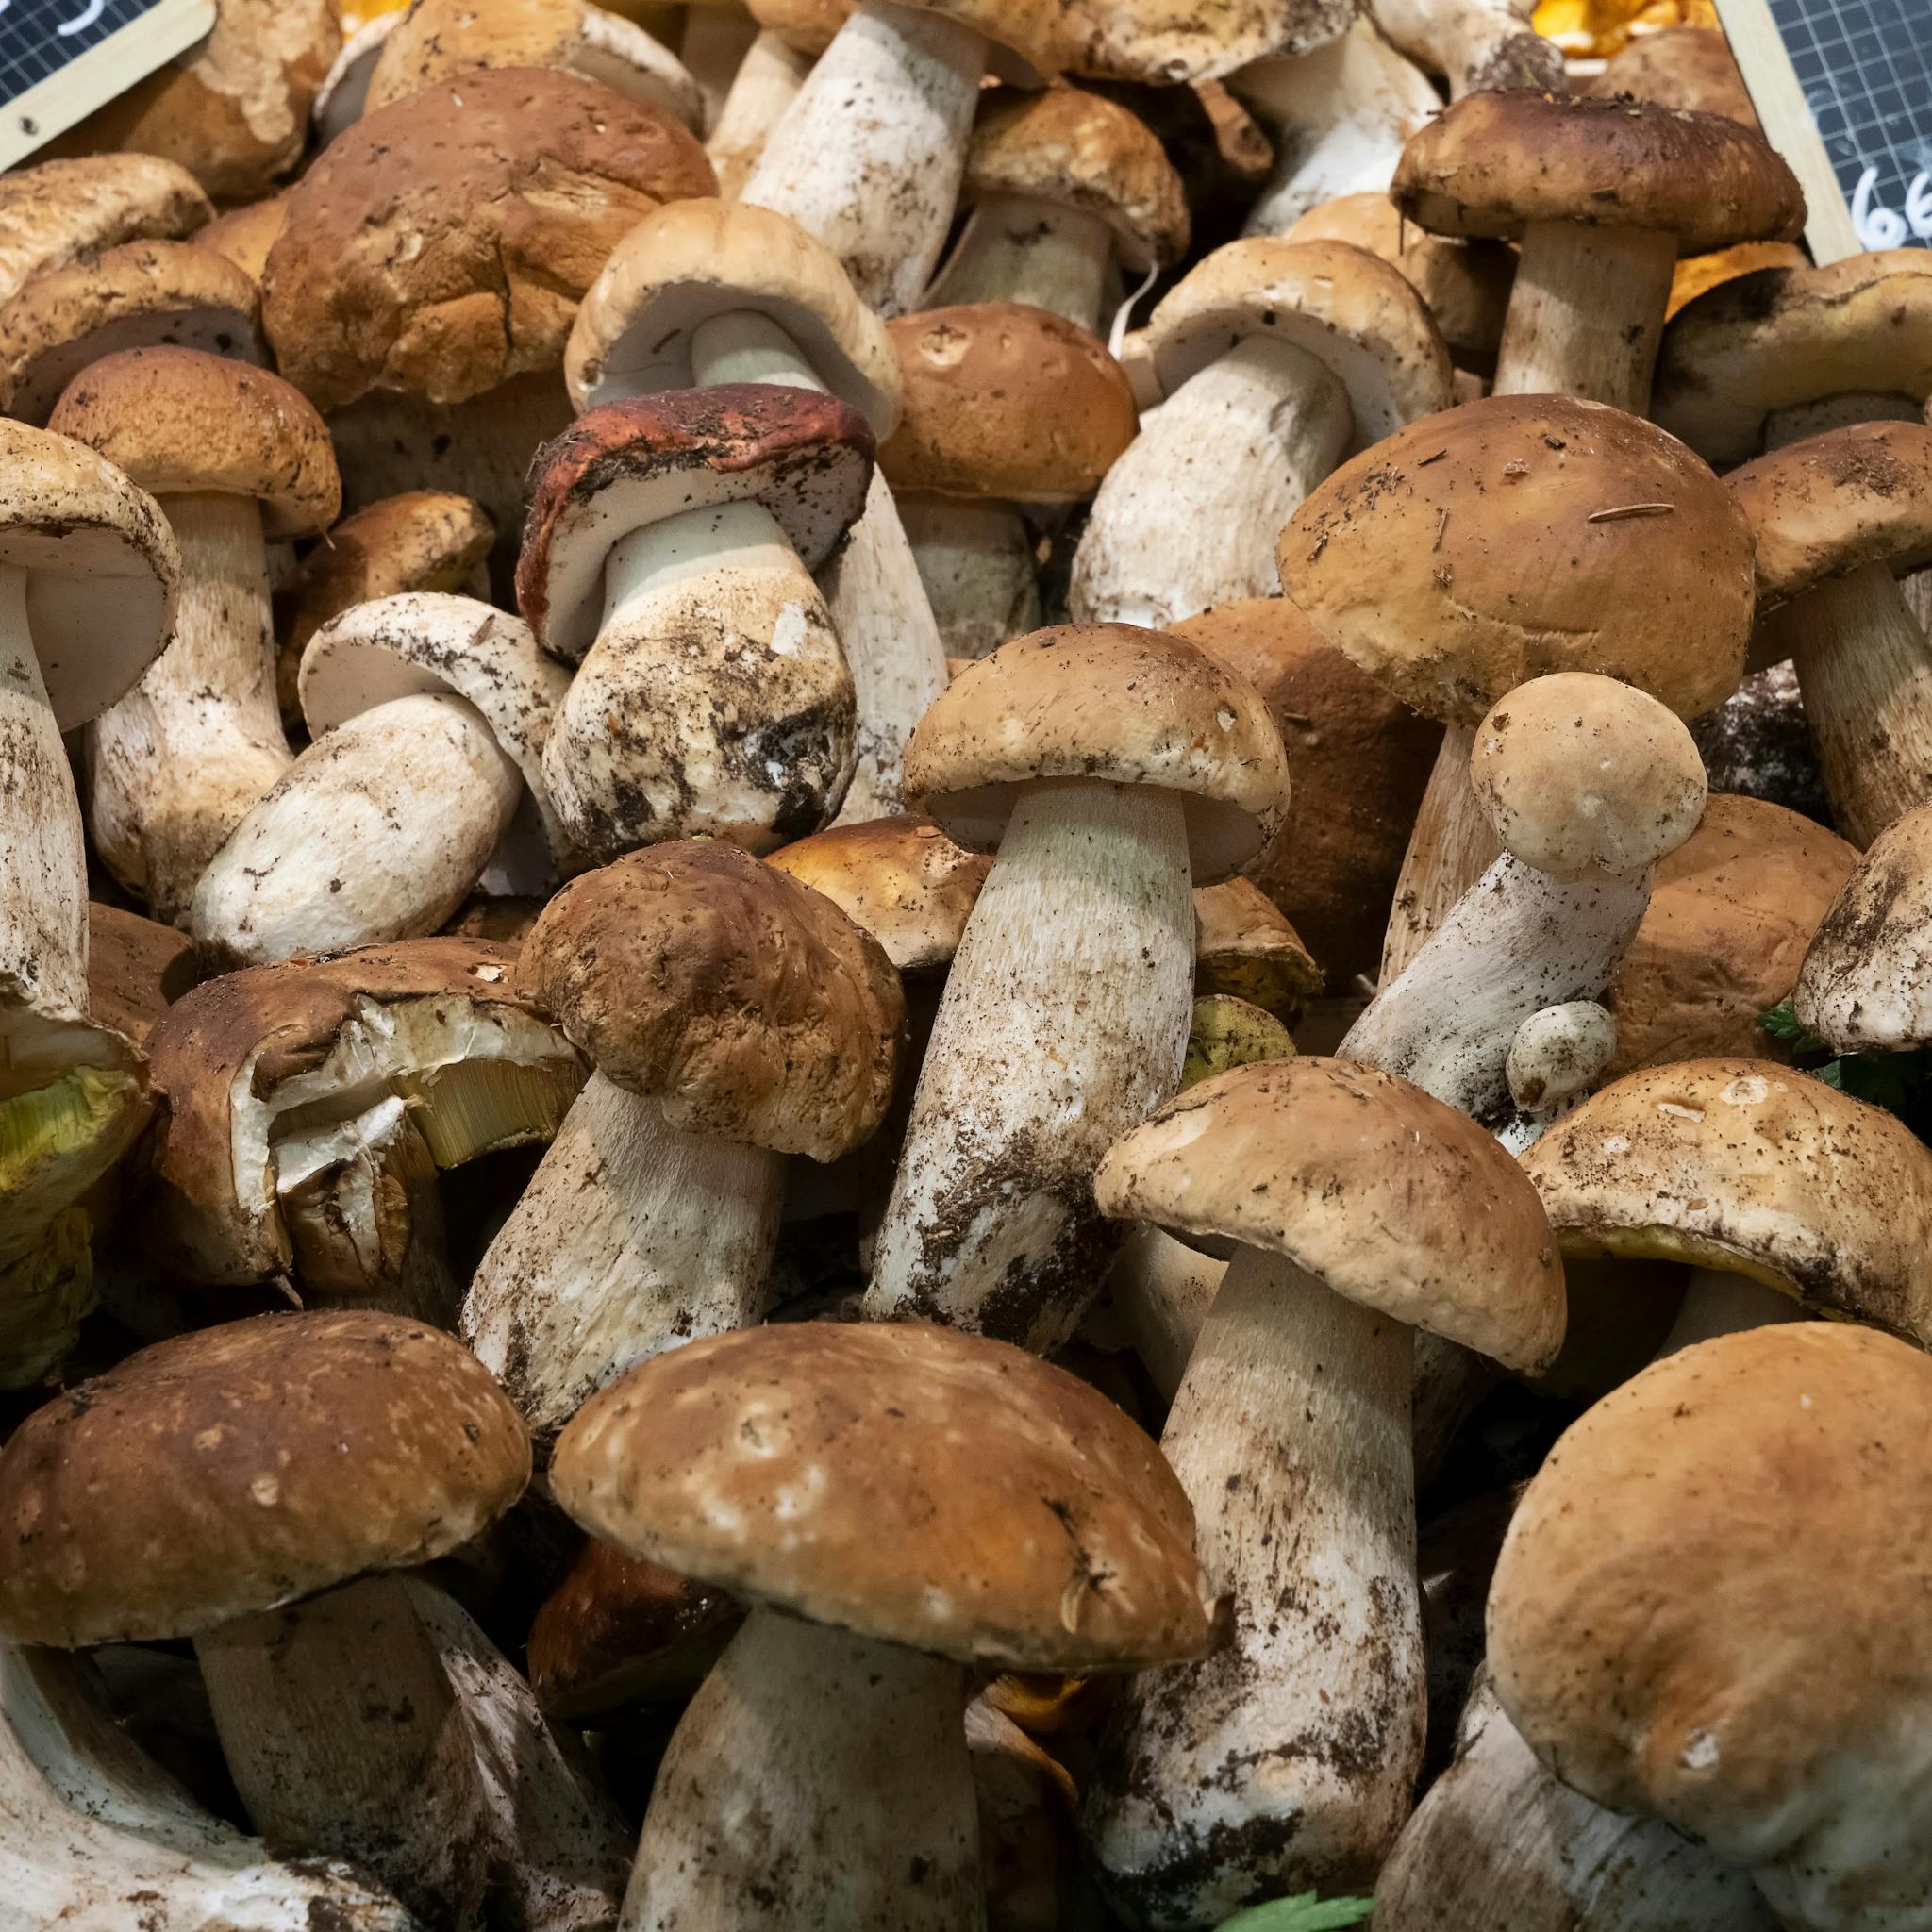 The Perfect Foundation: What Is the Best Medium For Growing Mushrooms Successfully?